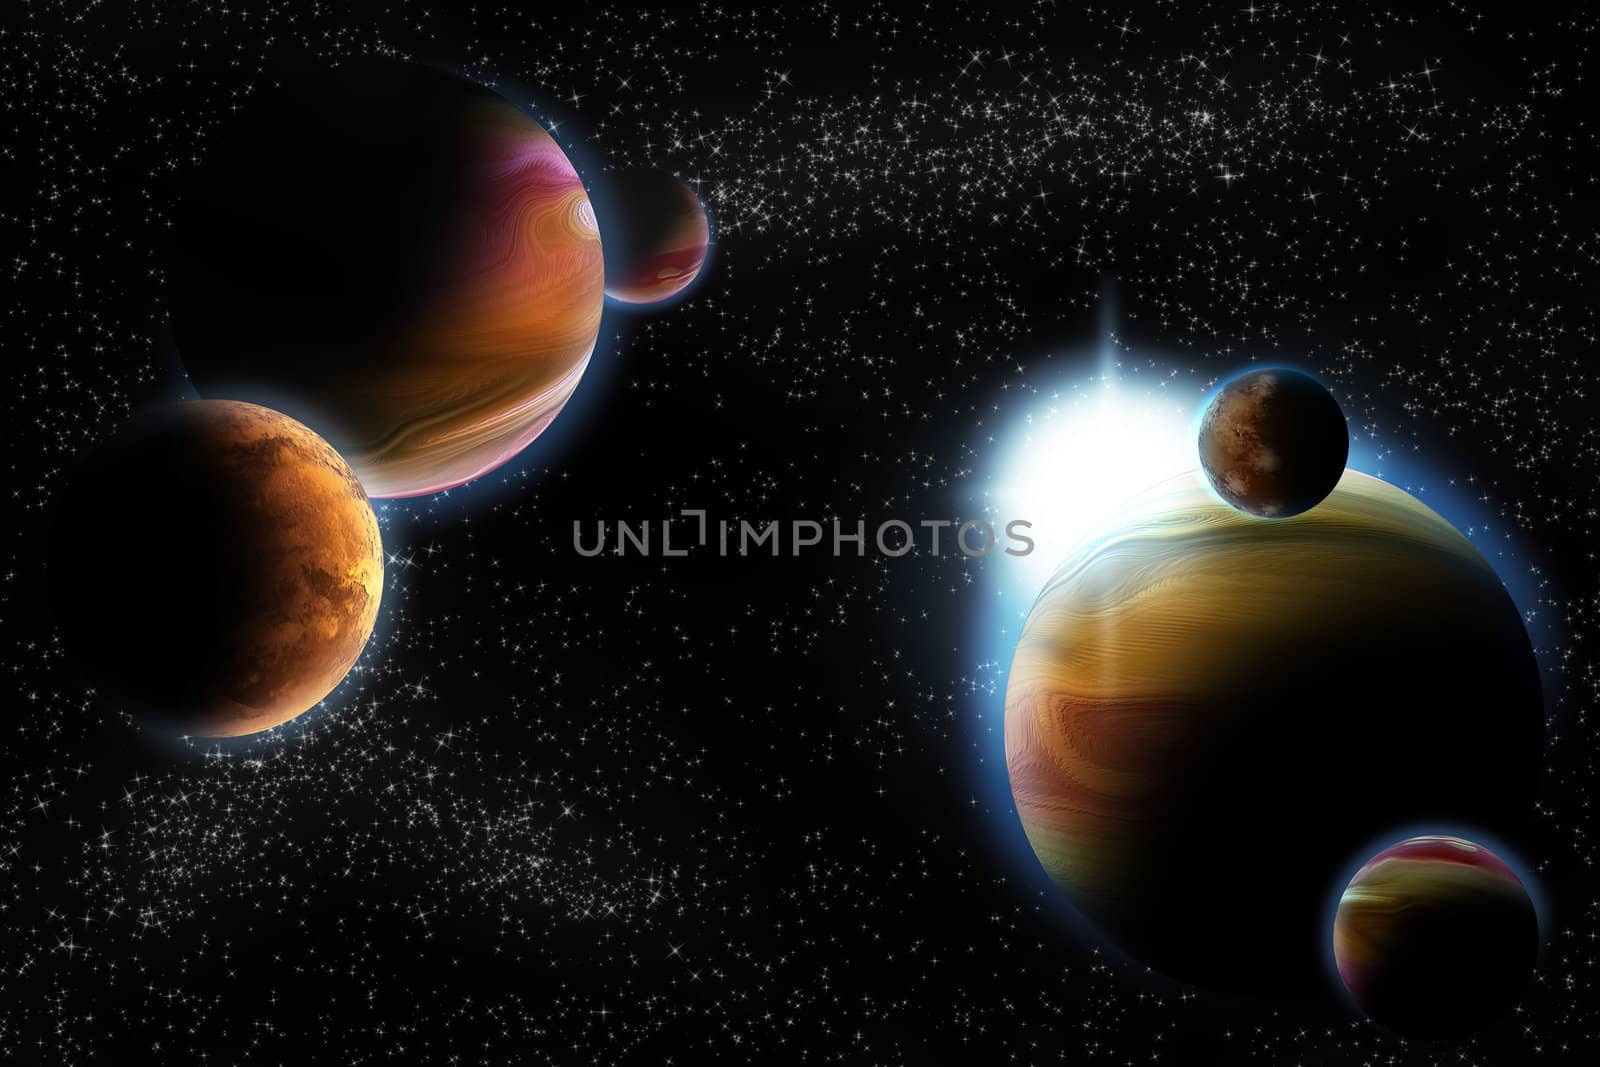 Abstract planet with sun flare in deep space - star nebula against black background